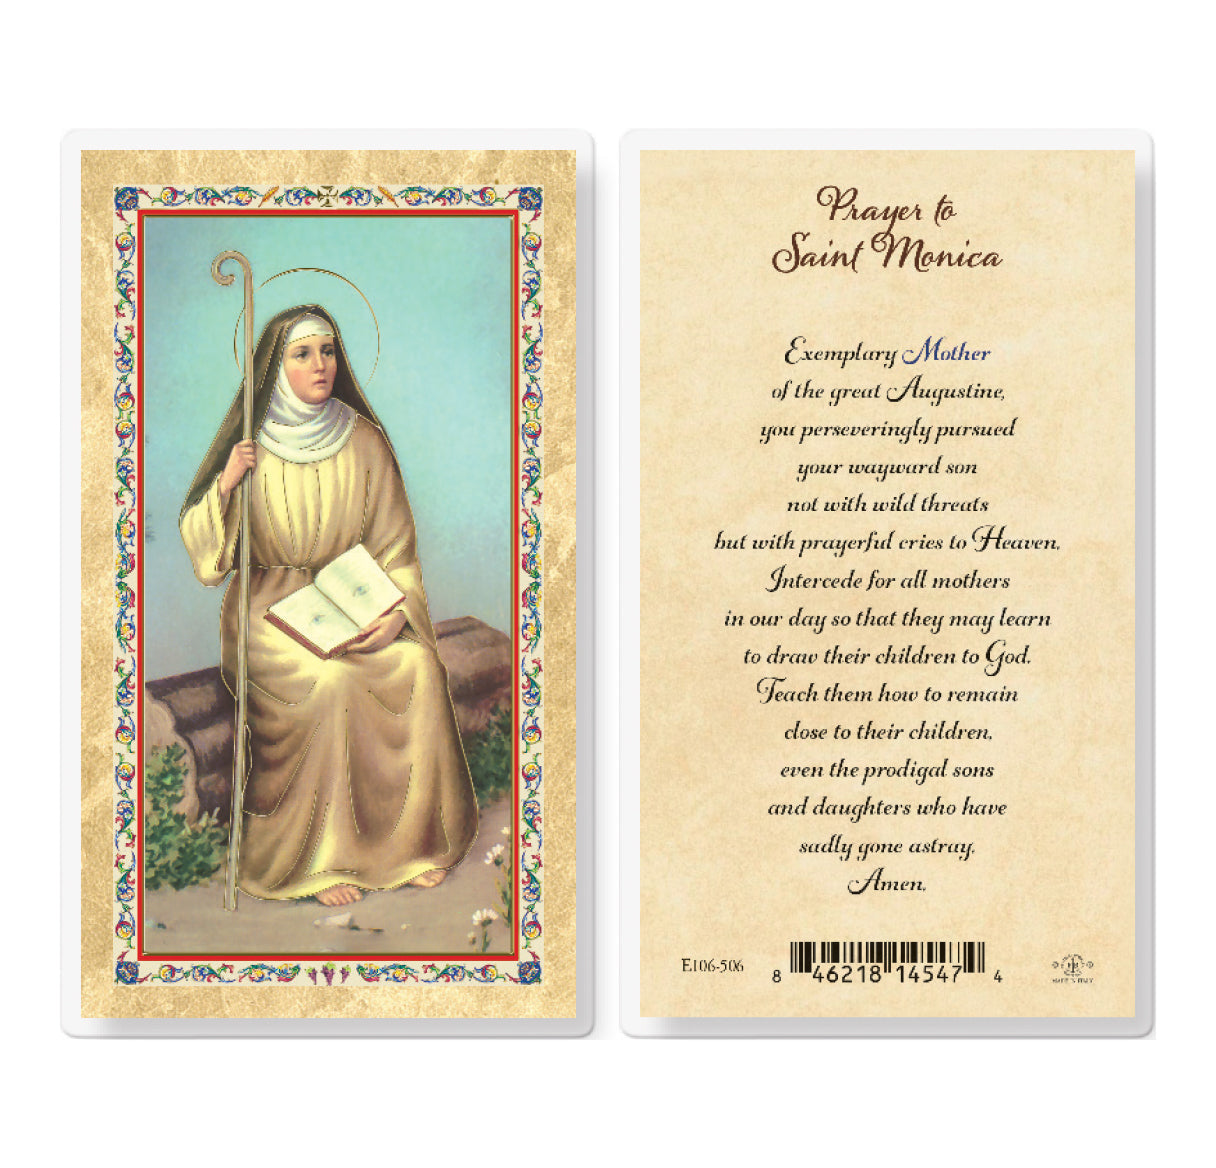 St. Monica Prayer - Biography Gold-Stamped Laminated Catholic Prayer Holy Card with Prayer on Back, Pack of 25